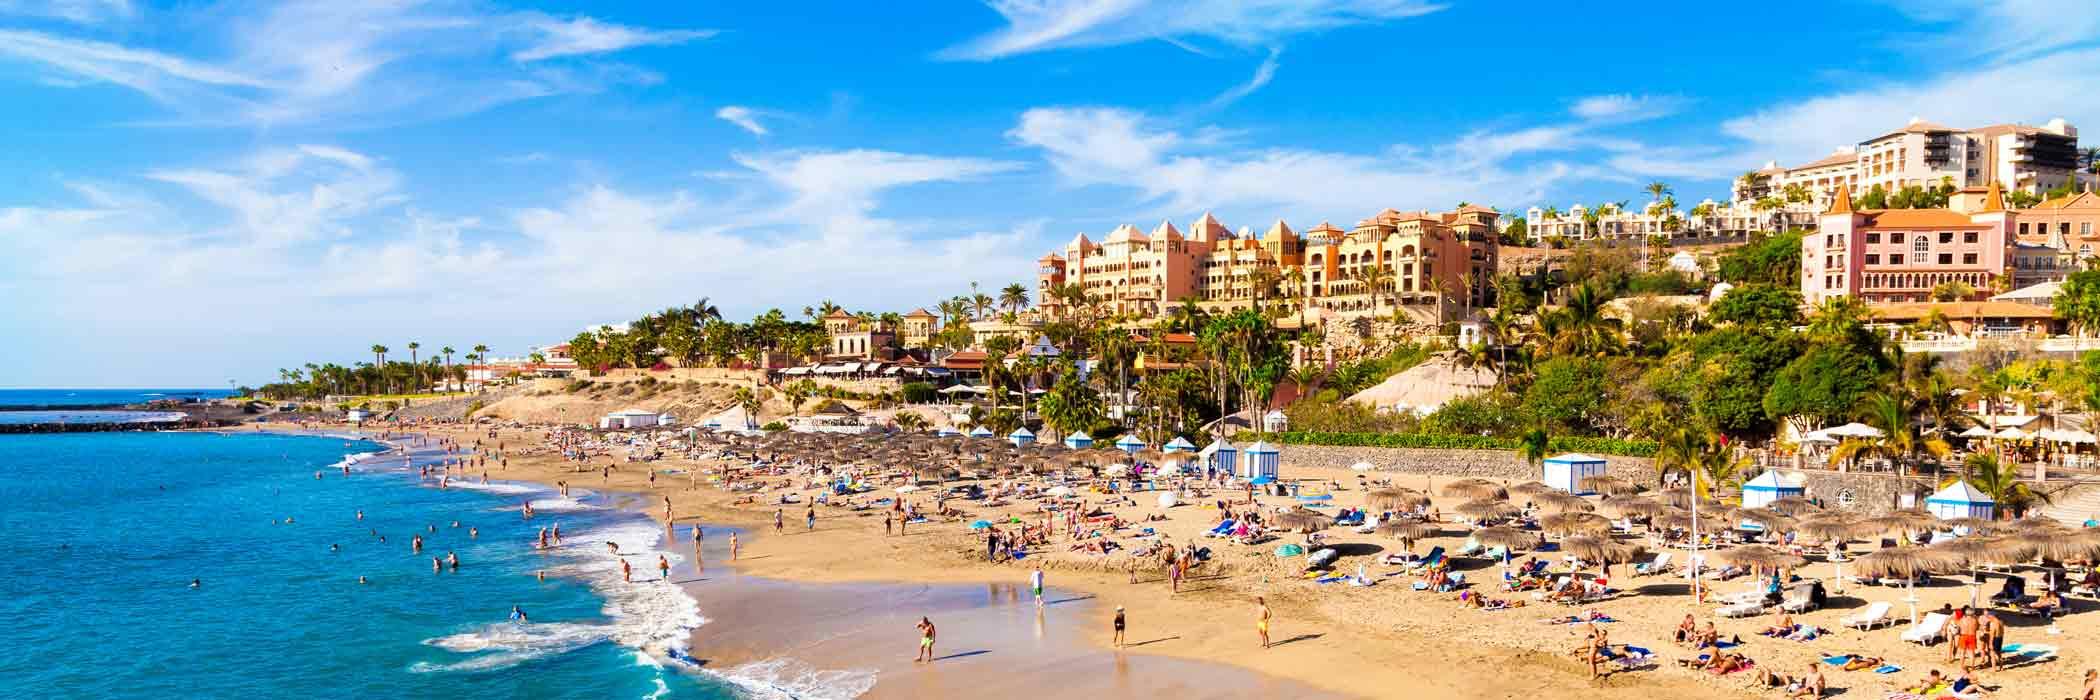 Cheap Holidays To Tenerife From Belfast